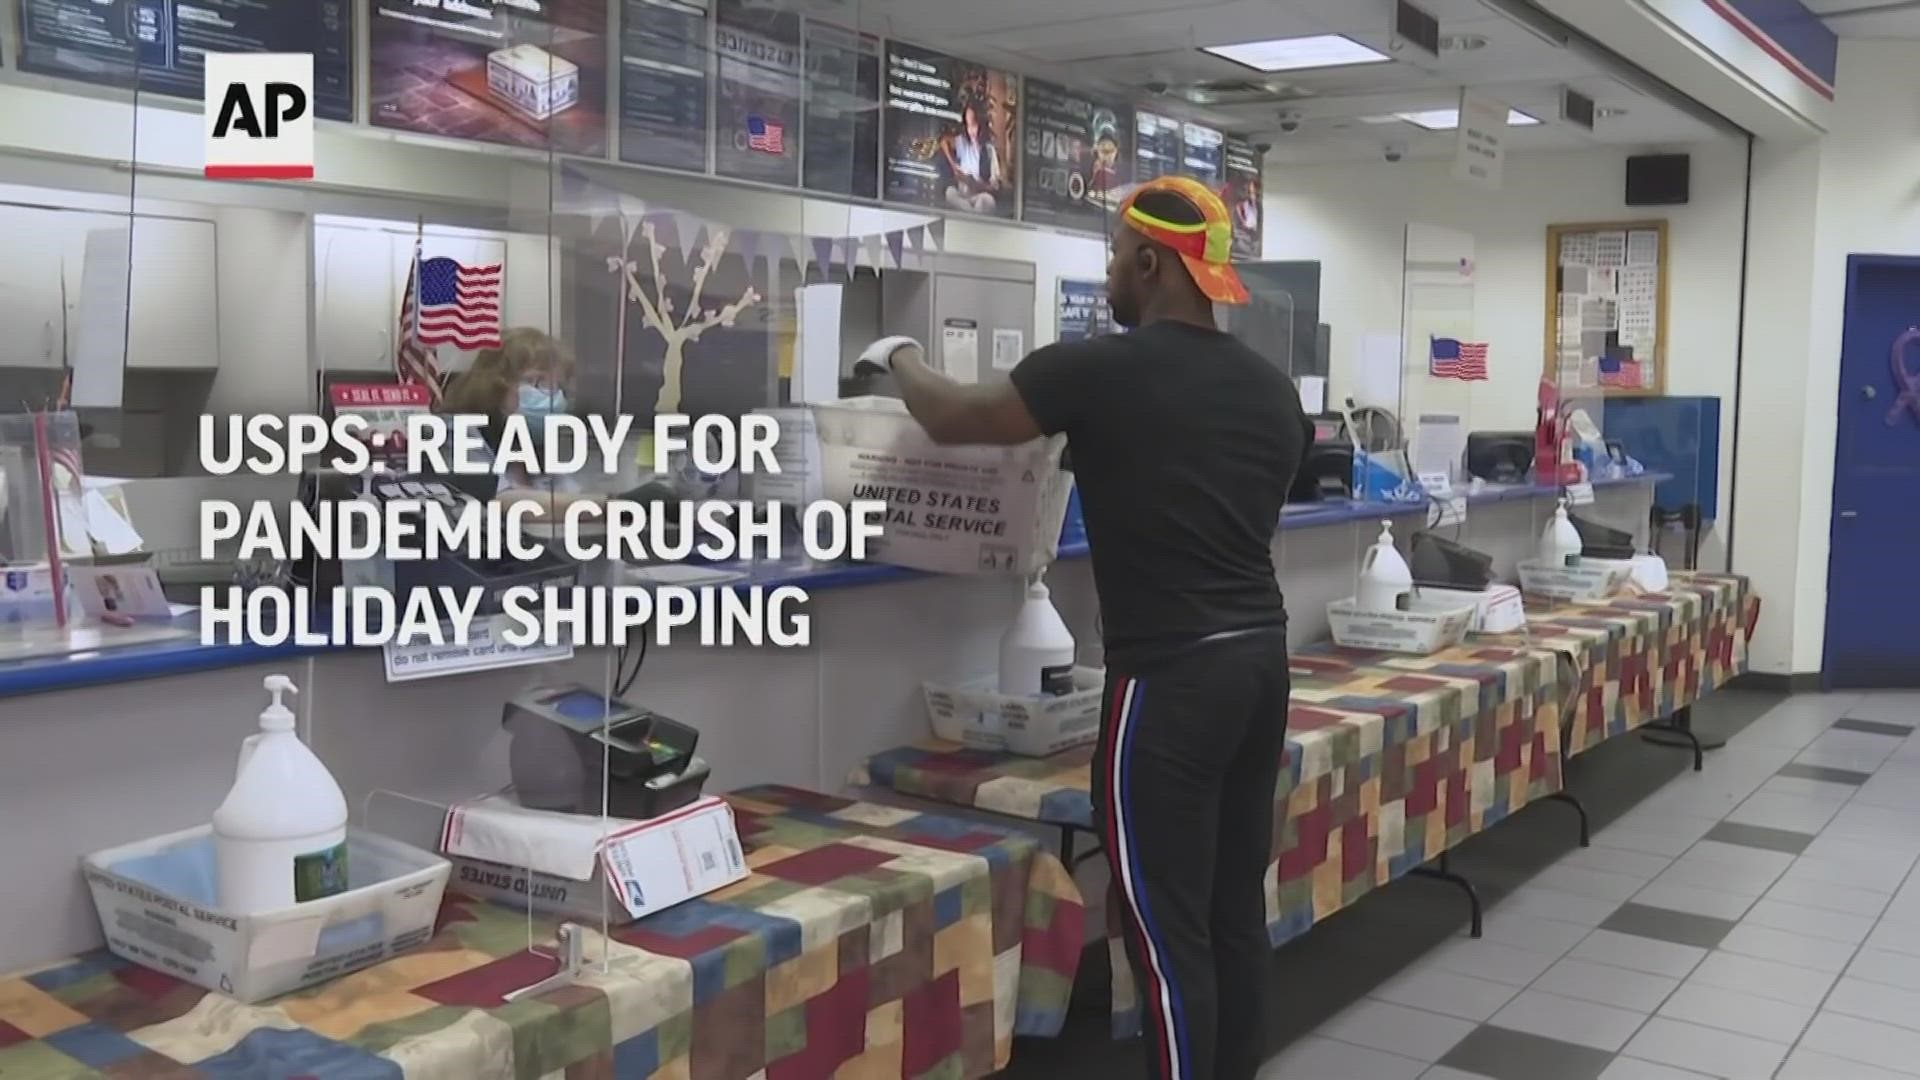 The United States Postal Service says it's prepared to handle the holiday shipping onslaught.